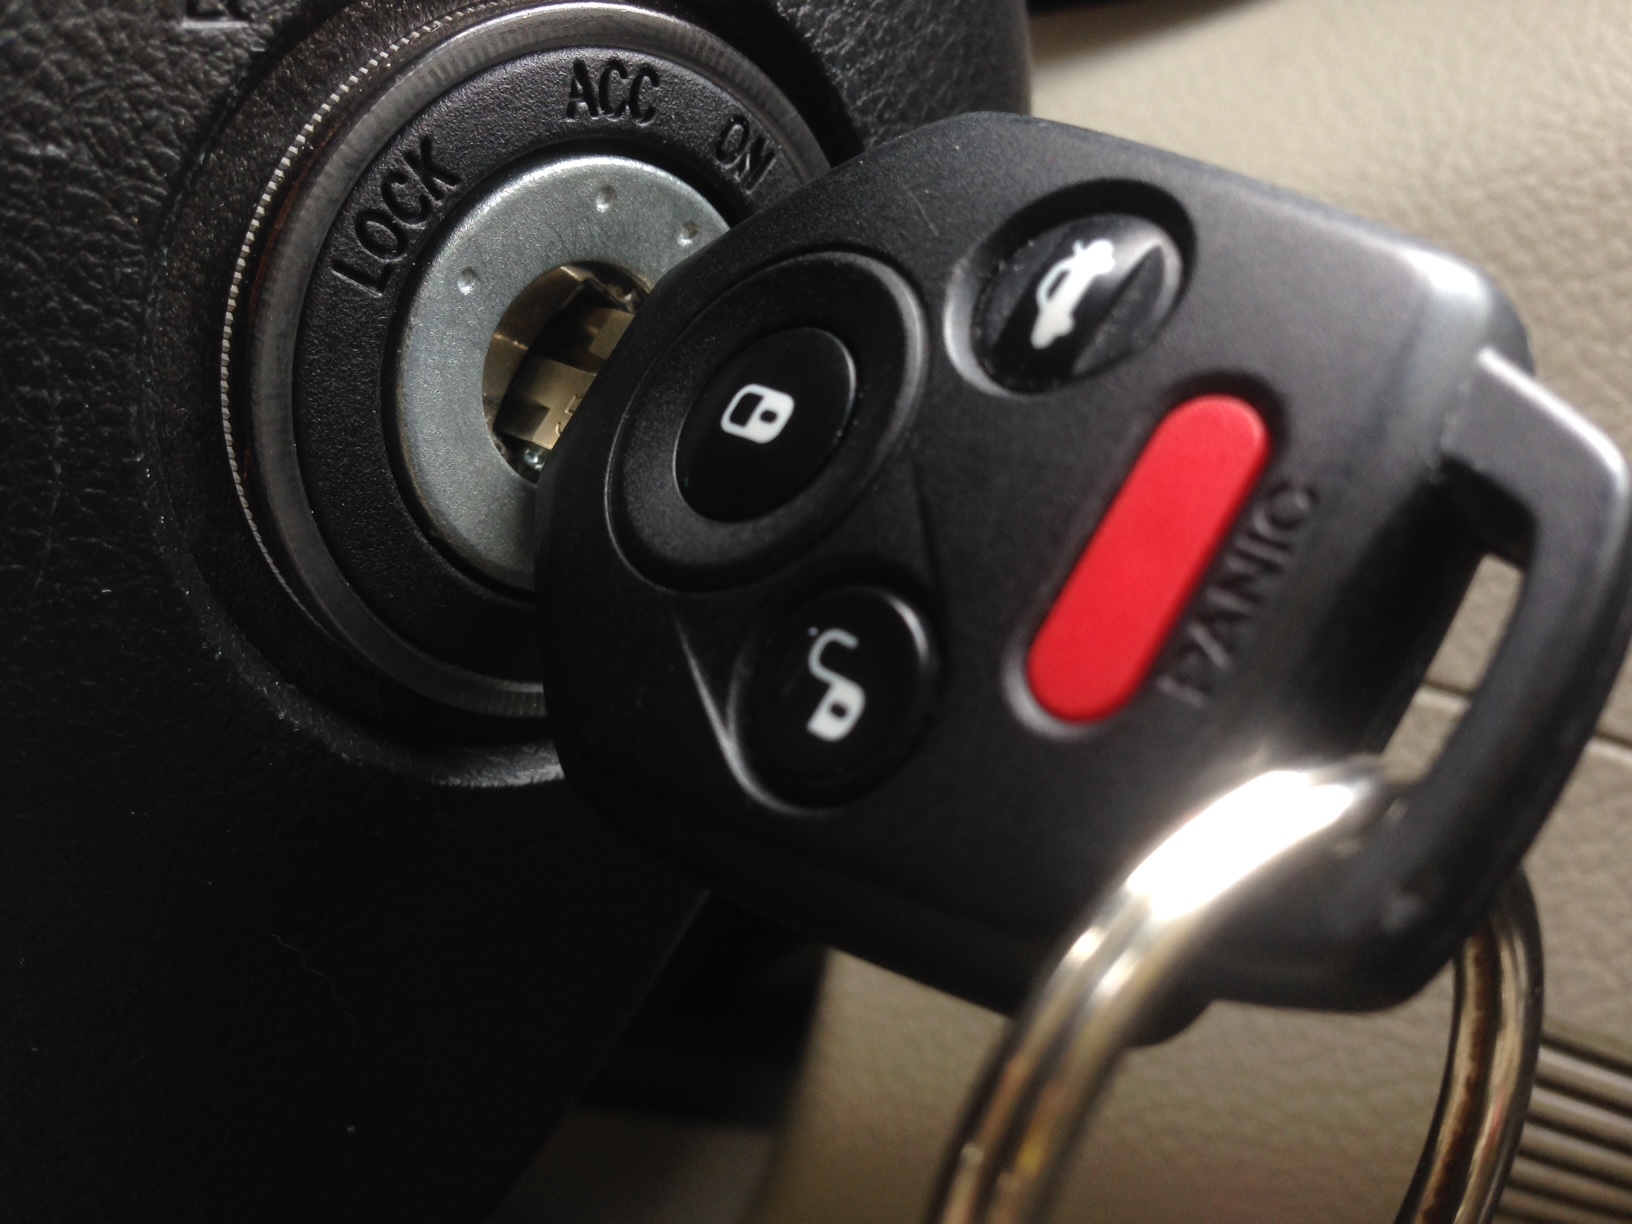 Give Security Lock Systems A Call At 813-874-1608 To Get Back In Your Locked Car